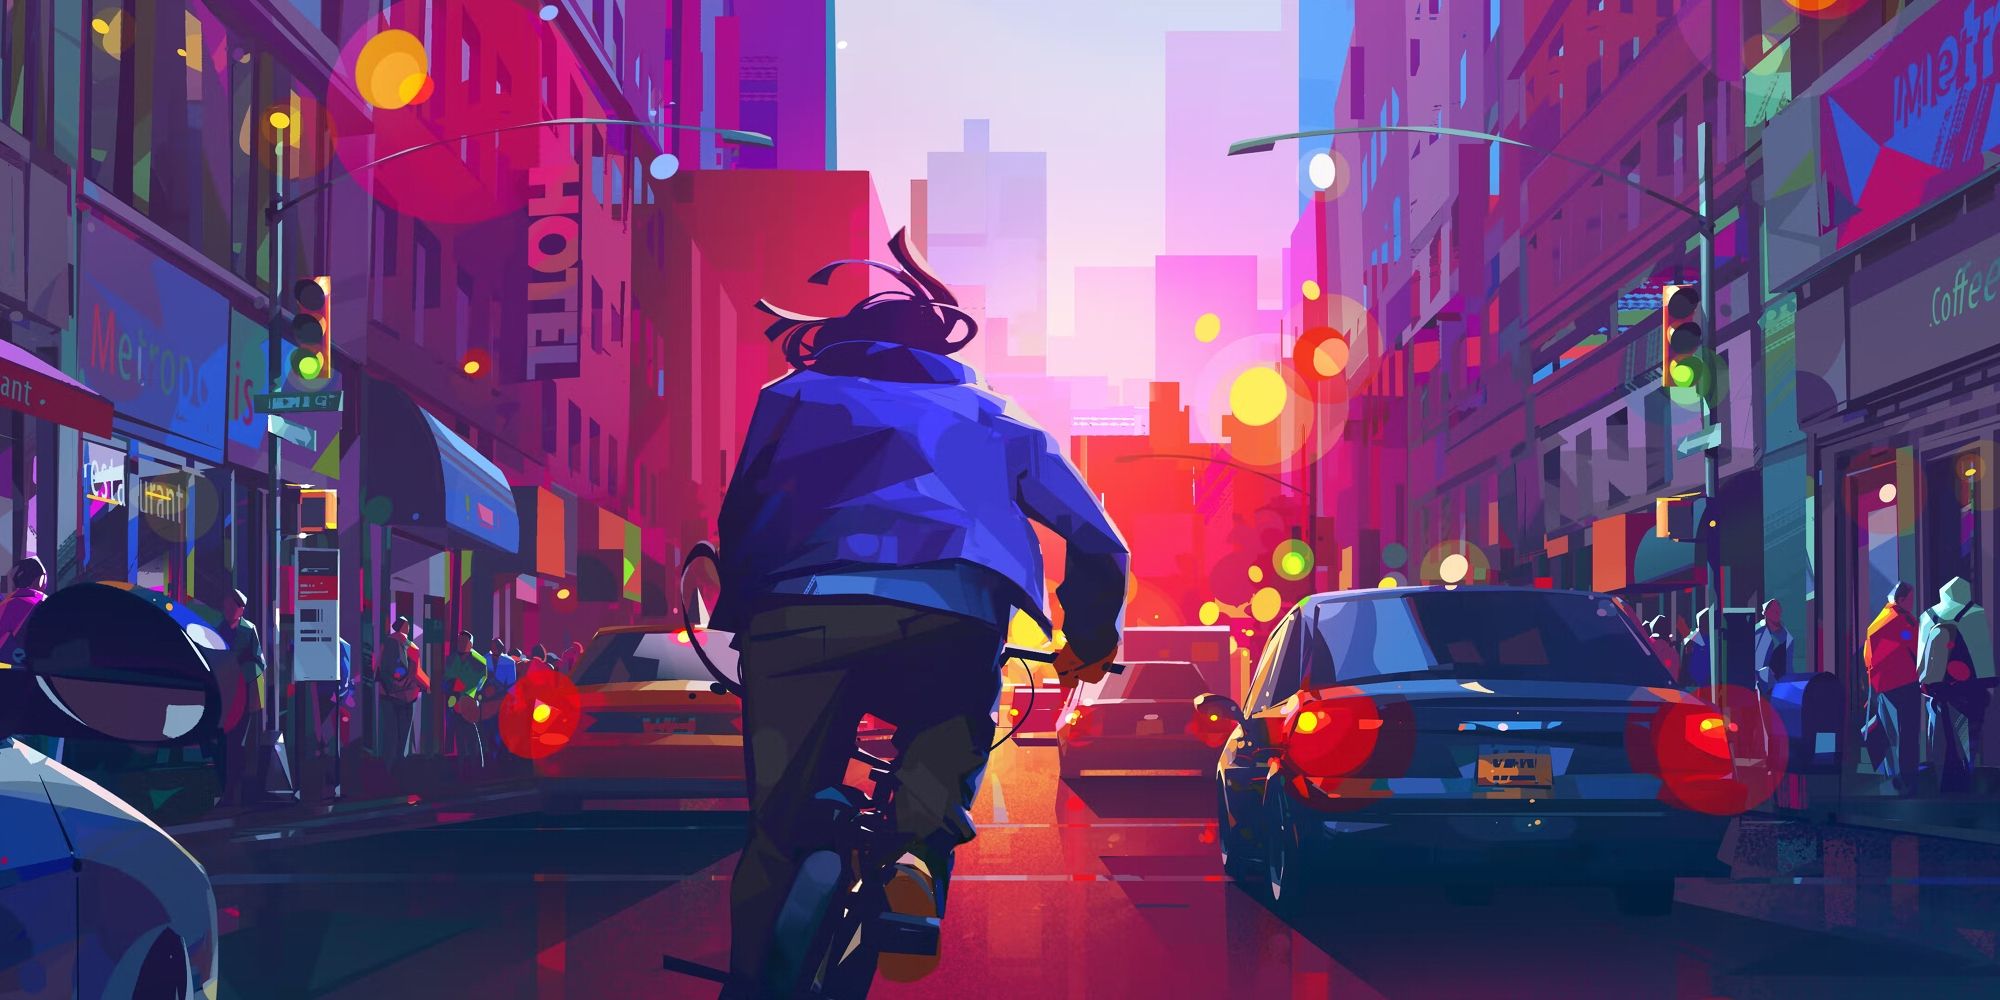 Concept art of Jabari riding through New York City on a bicycle in 'Entergalactic'